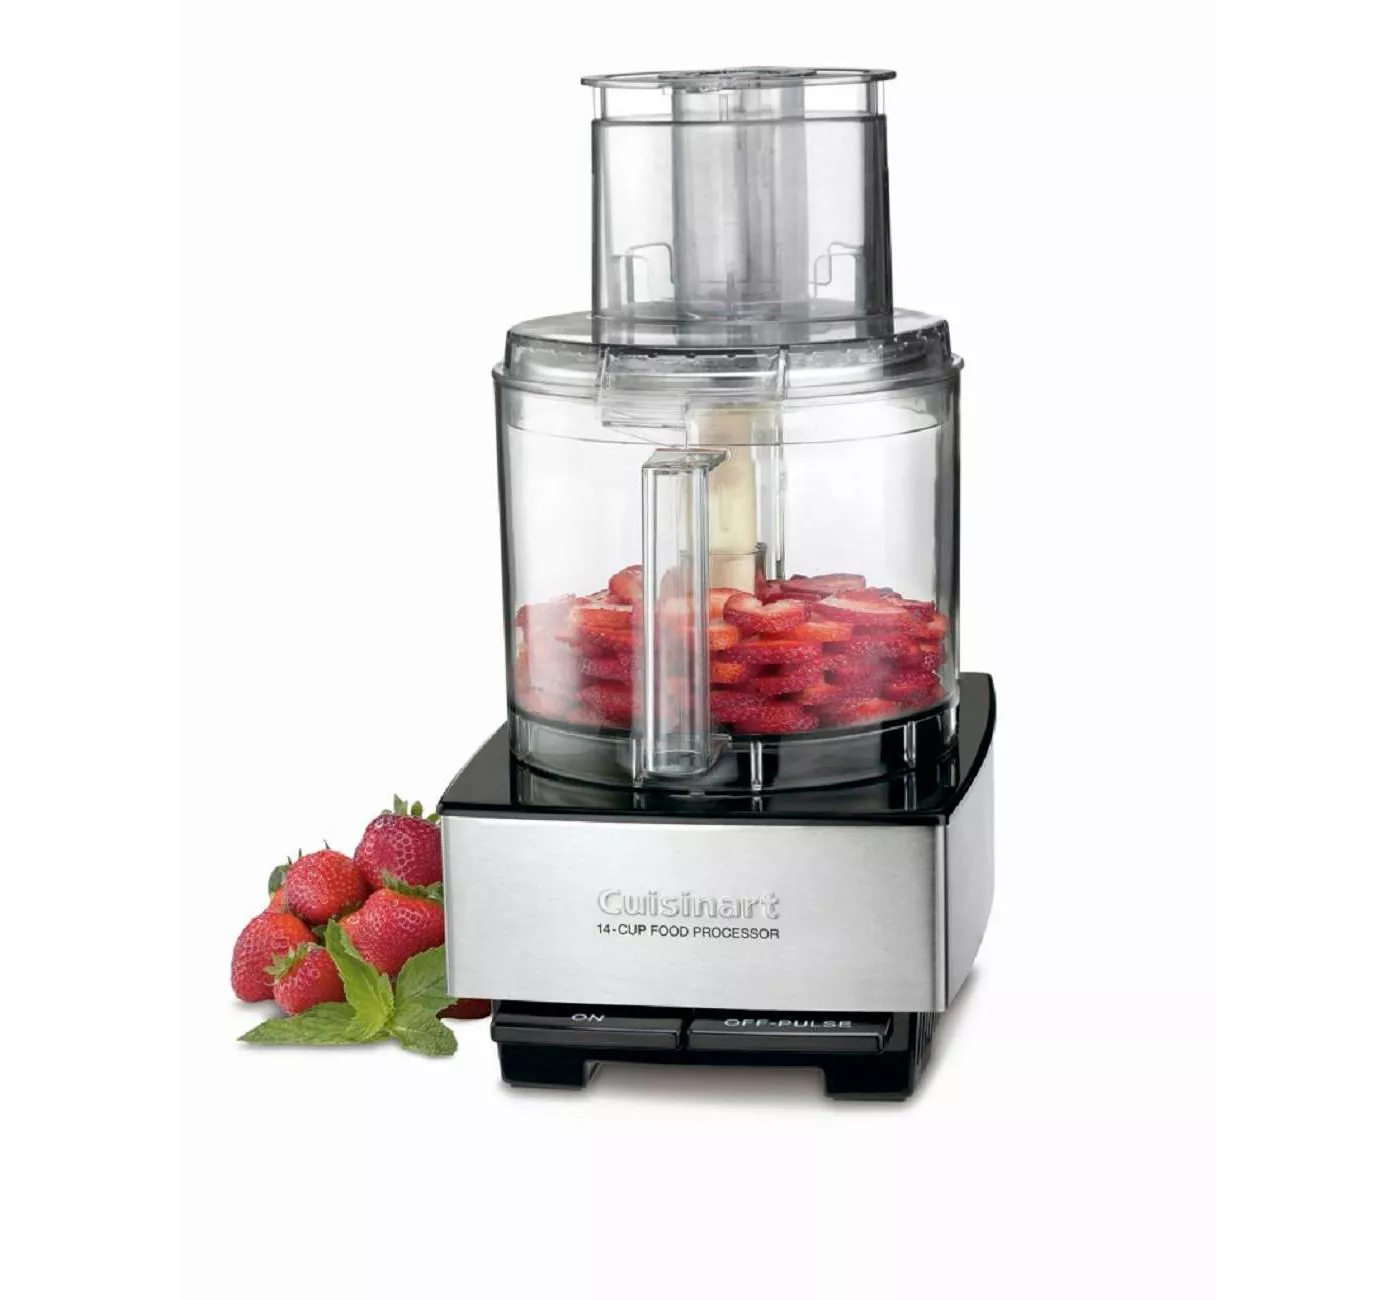 Cuisinart Custom 14-Cup Food Processor - Brushed Stainless Steel - DFP-14BCNY